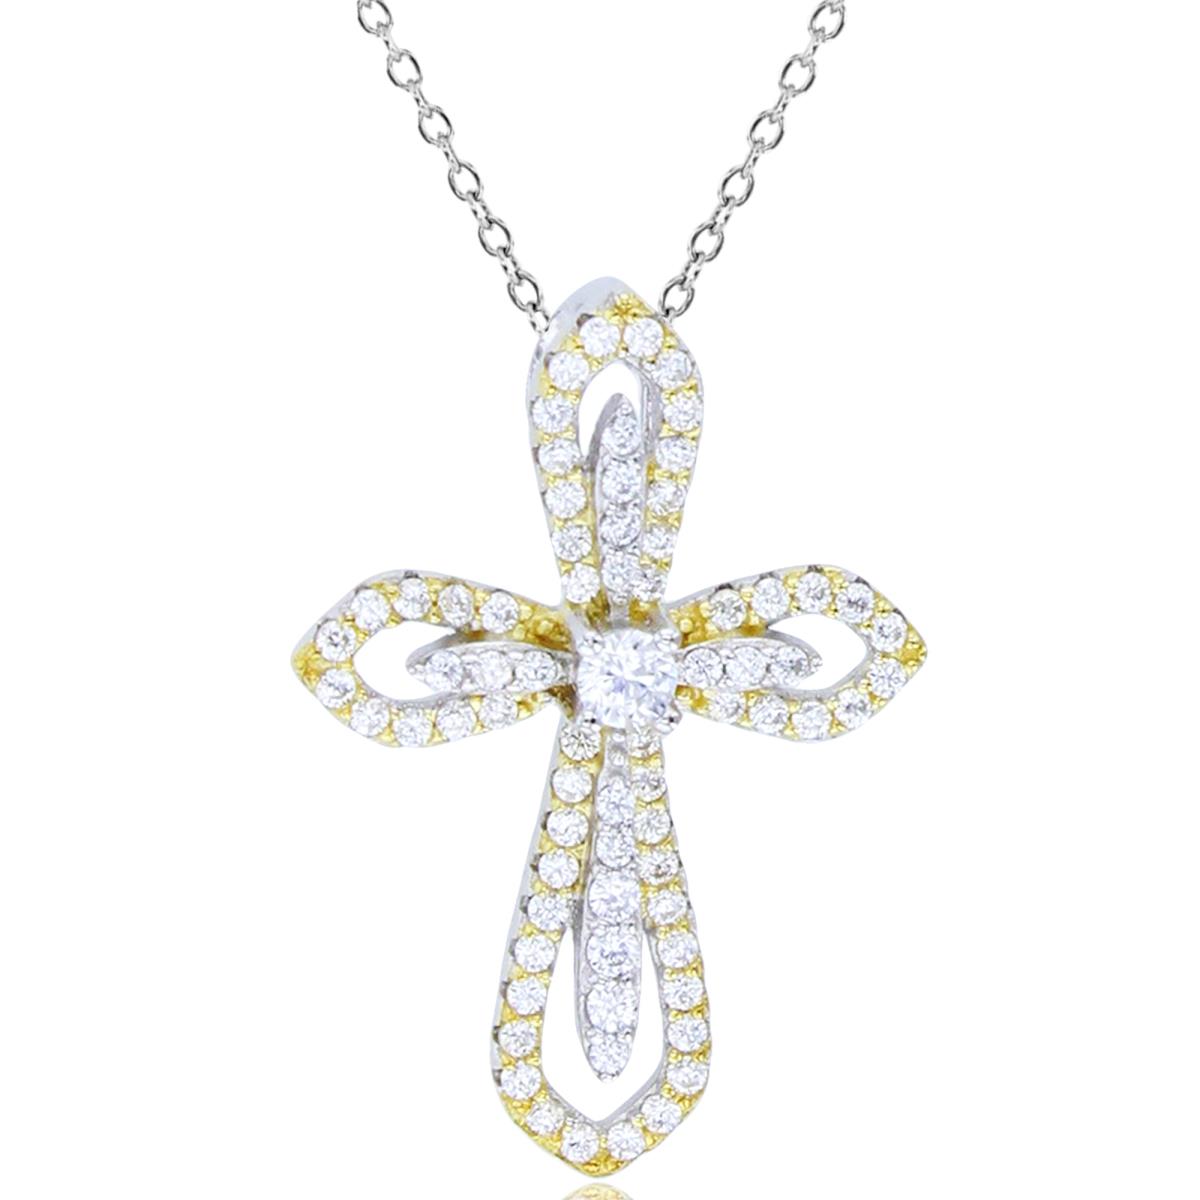 Sterling Silver Yellow/White Rnd CZ Cross 17"+2"Necklace